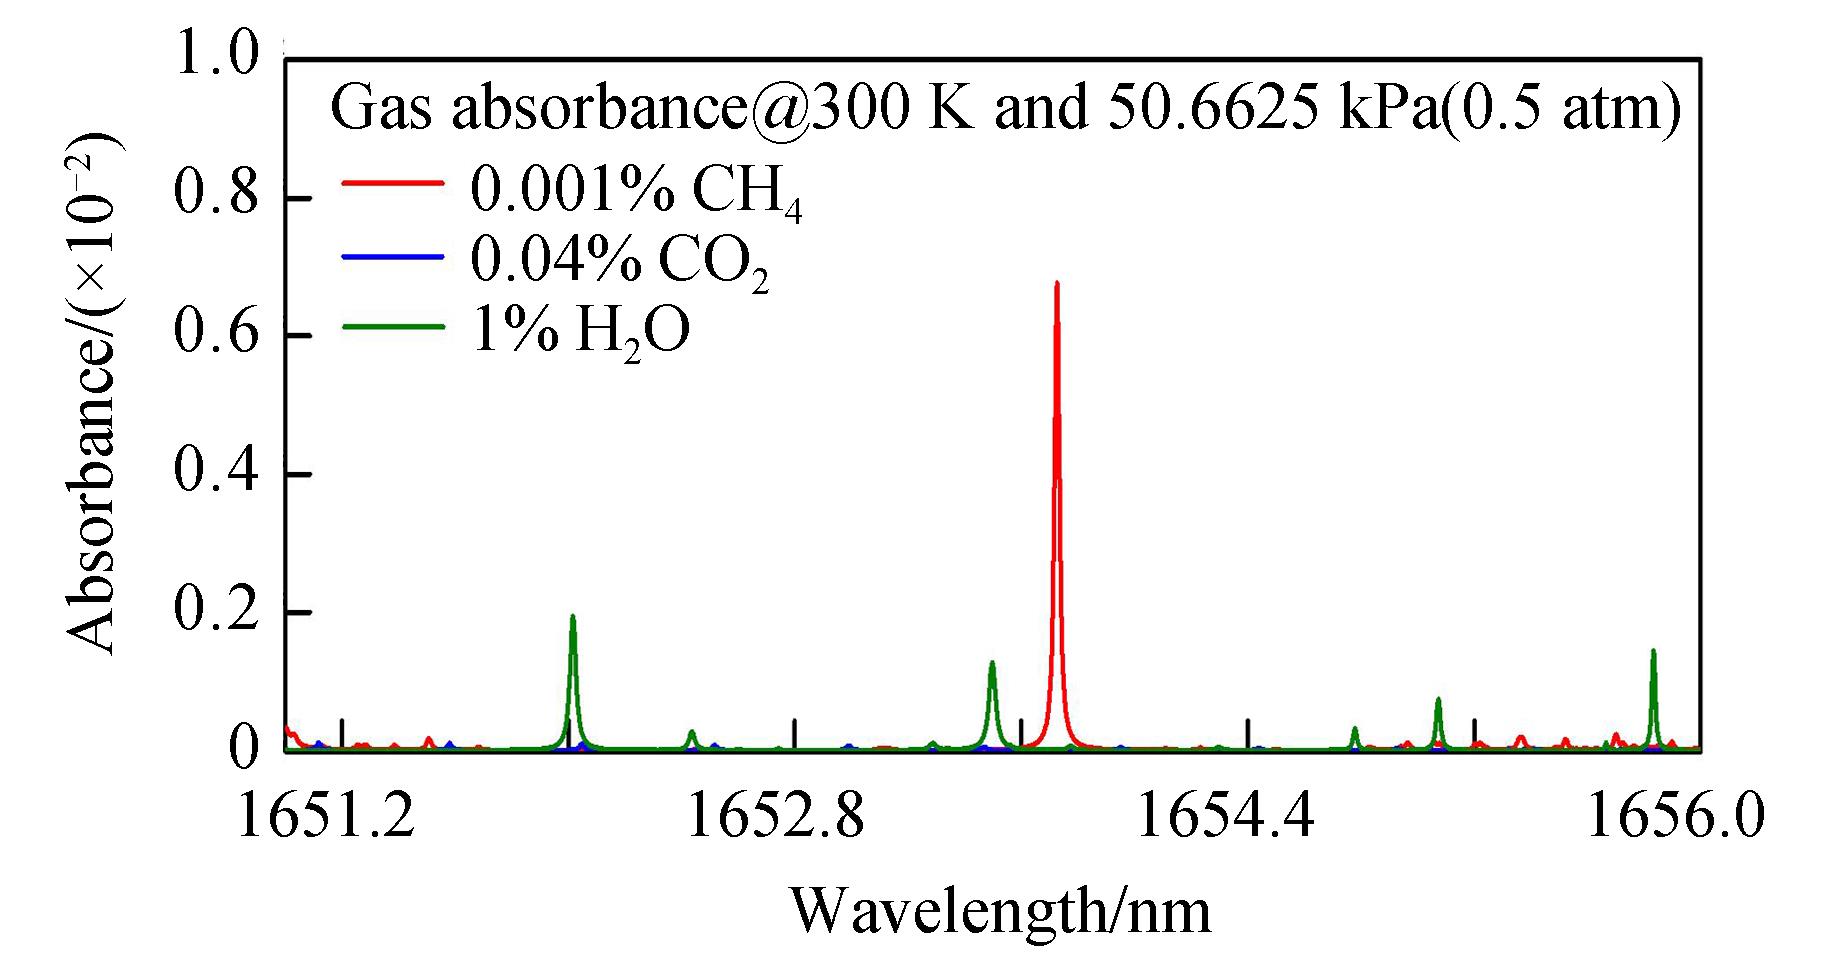 The absorption spectrum of CH4, CO2, and H2O in the vicinity of 1 653 nm